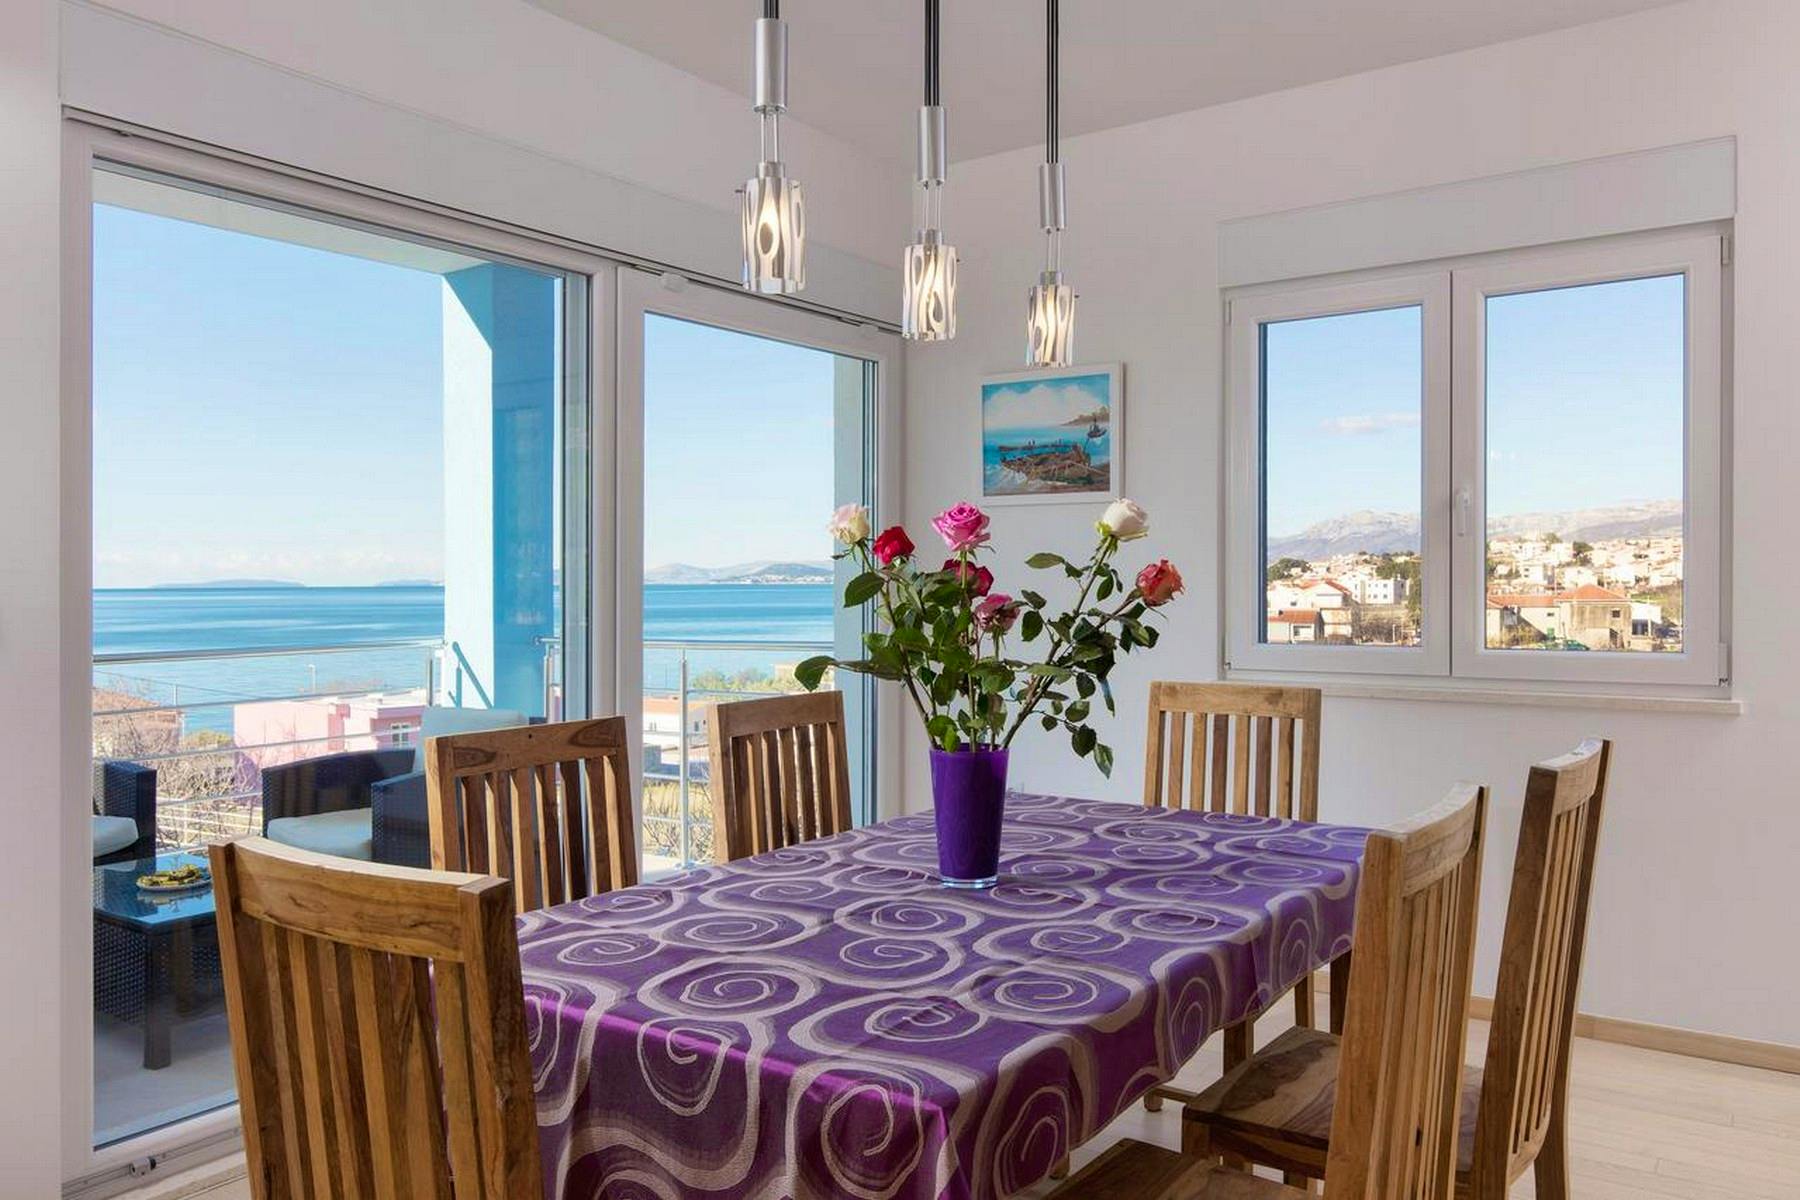 Dining area overlooking the sea